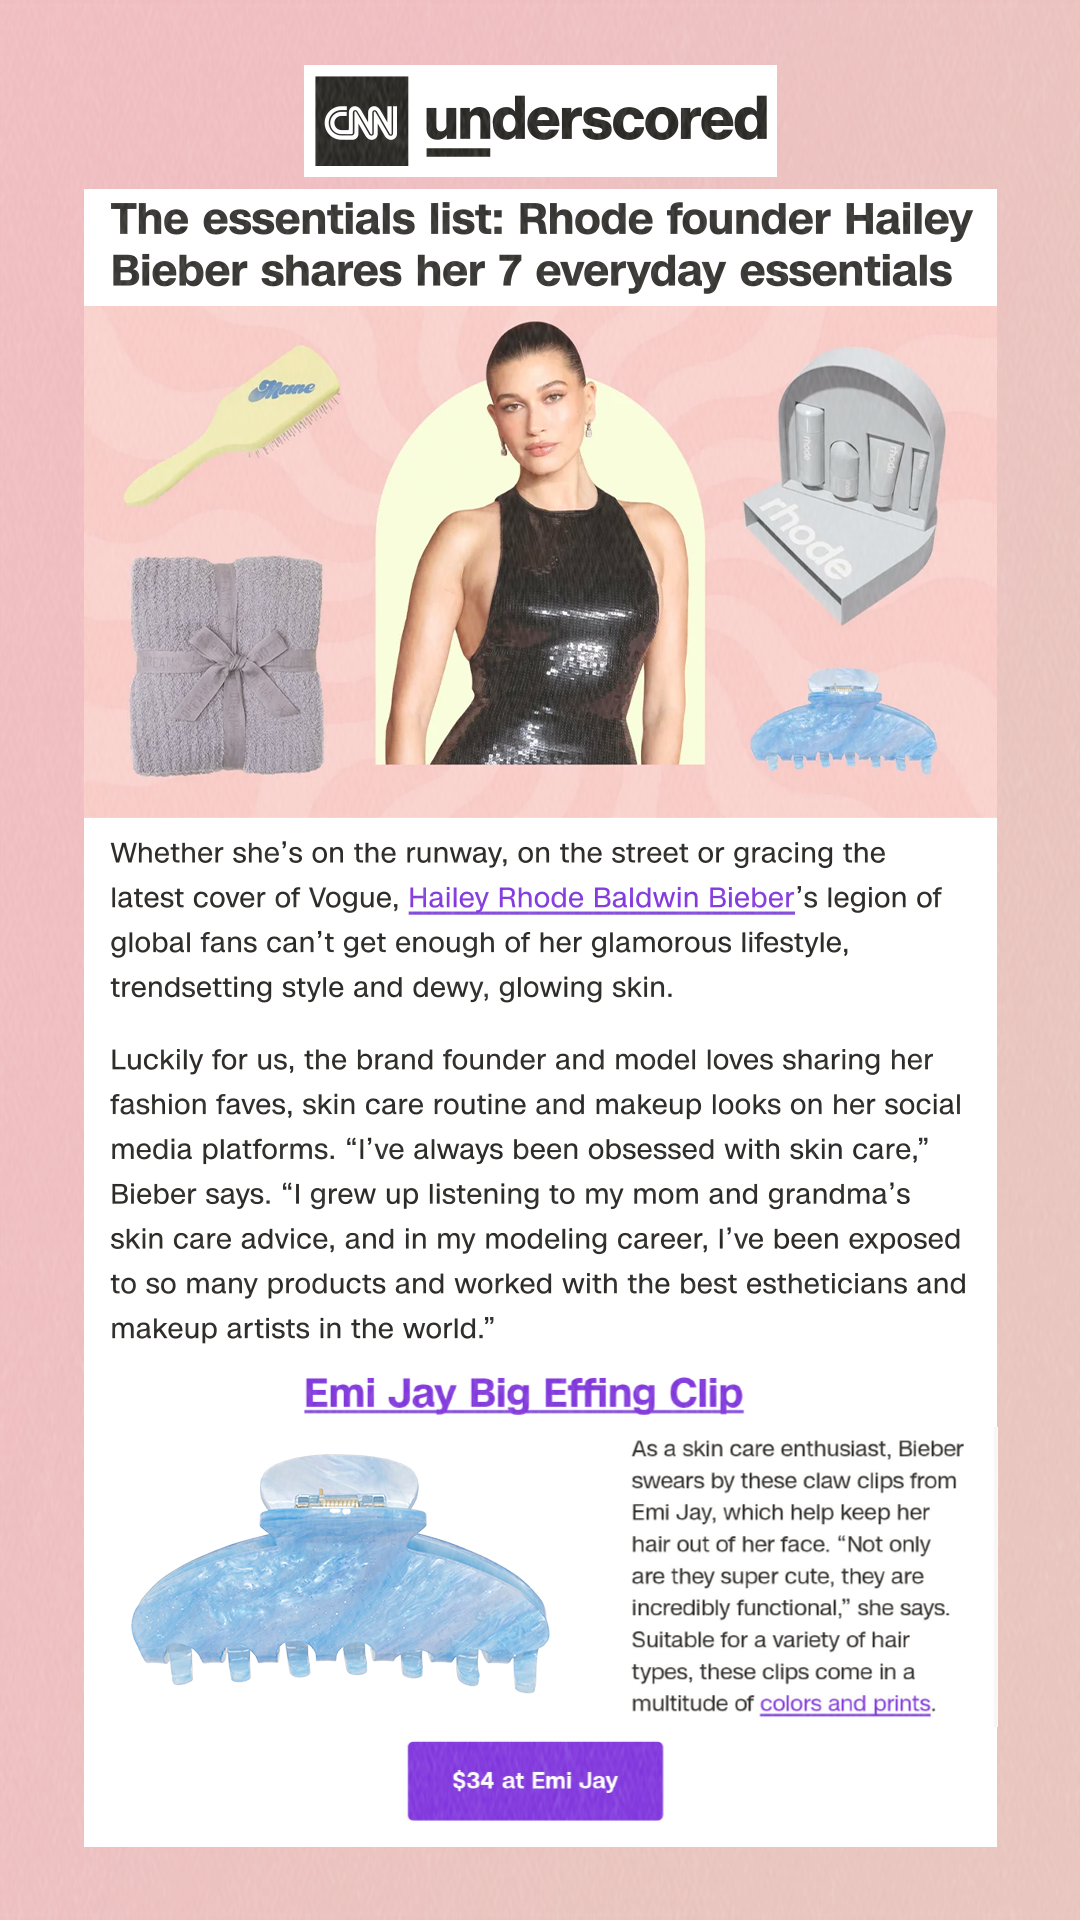 The essentials list: Rhode founder Hailey Bieber shares her 7 everyday essentialsWhether she’s on the runway, on the street or gracing the latest cover of Vogue, Hailey Rhode Baldwin Bieber’s legion of global fans can’t get enough of her glamorous lifestyle, trendsetting style and dewy, glowing skin.Luckily for us, the brand founder and model loves sharing her fashion faves, skin care routine and makeup looks on her social media platforms. 'I’ve always been obsessed with skin care,' Bieber says. 'I grew up listening to my mom and grandma’s skin care advice, and in my modeling career, I’ve been exposed to so many products and worked with the best estheticians and makeup artists in the world.'Emi Jay Big Effing ClipEmi JayAs a skin care enthusiast, Bieber swears by these claw clips from Emi Jay, which help keep her hair out of her face. “'ot only are they super cute, they are incredibly functional,' she says. Suitable for a variety of hair types, these clips come in a multitude of colors and prints.$34 at Emi Jay